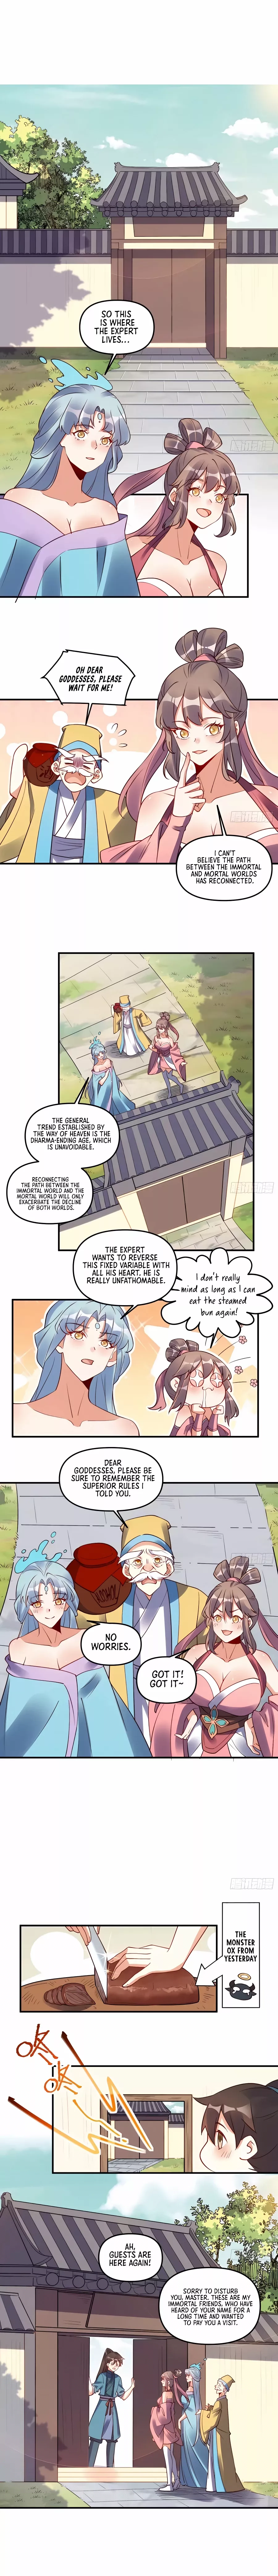 I’M Actually A Cultivation Bigshot - Page 3